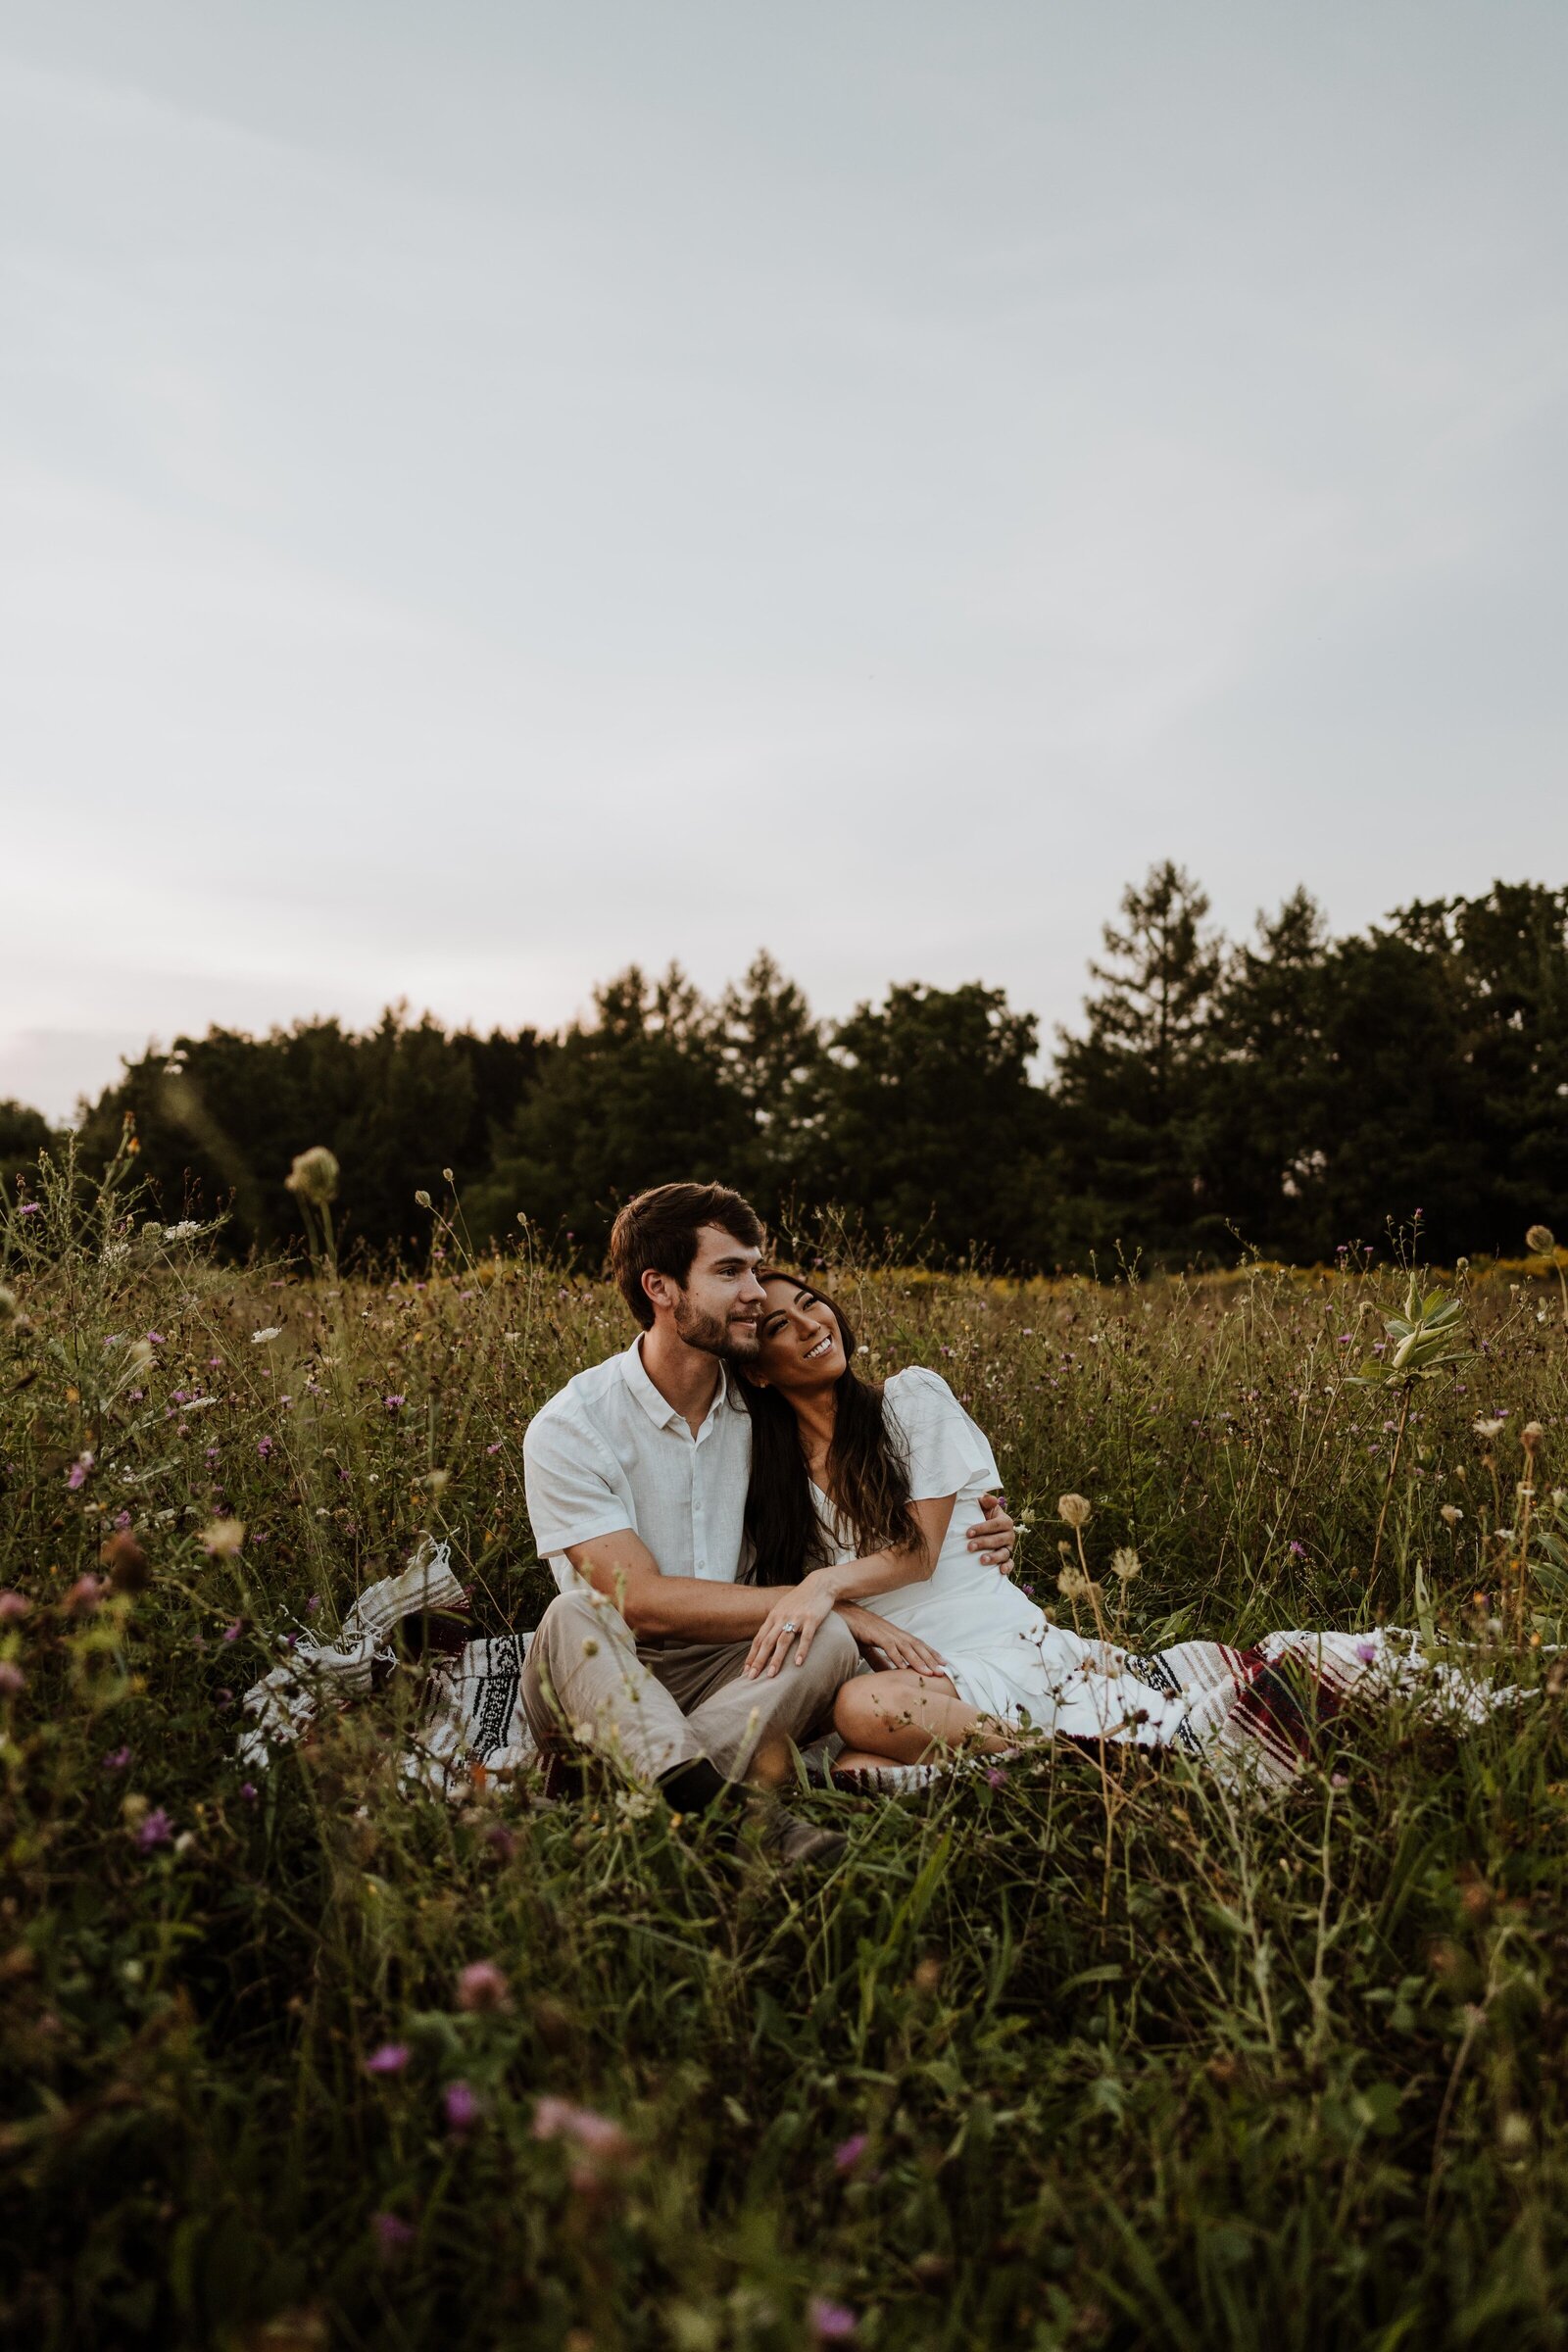 Donna Marie Photo Co. | Watertown, NY Elopement Photographer